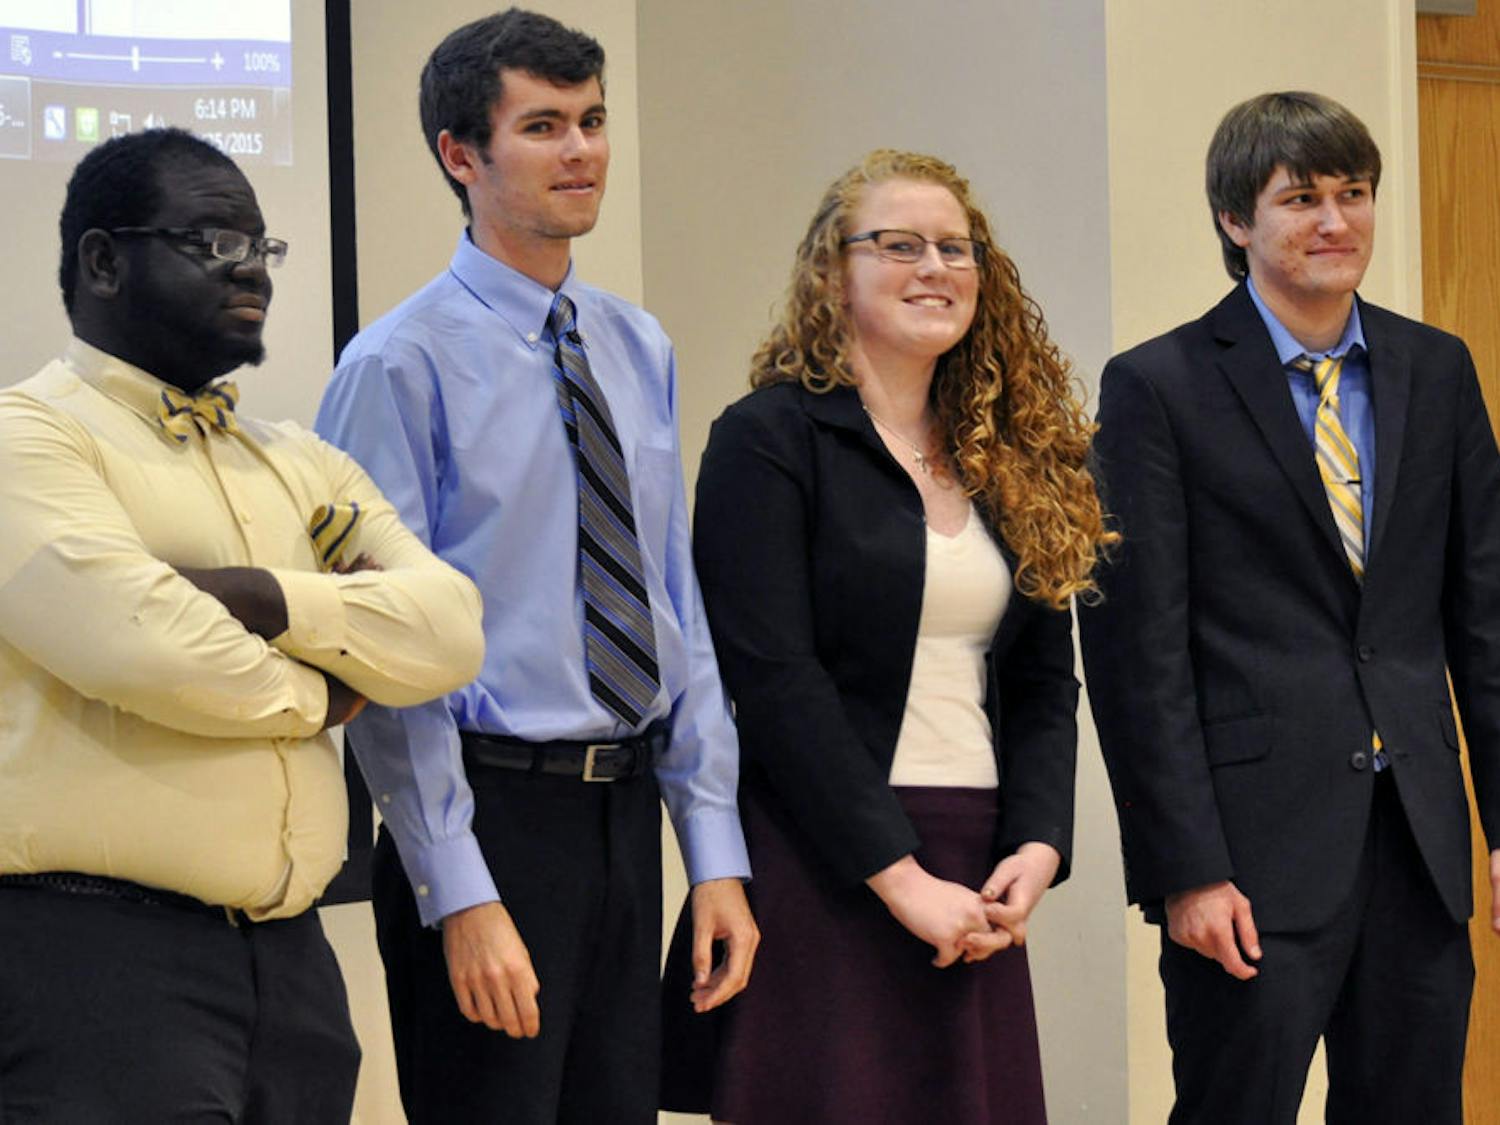 From left: Santa Fe Student Government Senator-elect Iyanuoluwa “Isreal” Okeowo poses for a photo with President-elect Conor Flynn, Vice-President-elect Hannah Gwynn and Treasurer-elect Justin Deese at the senate meeting on Wednesday.